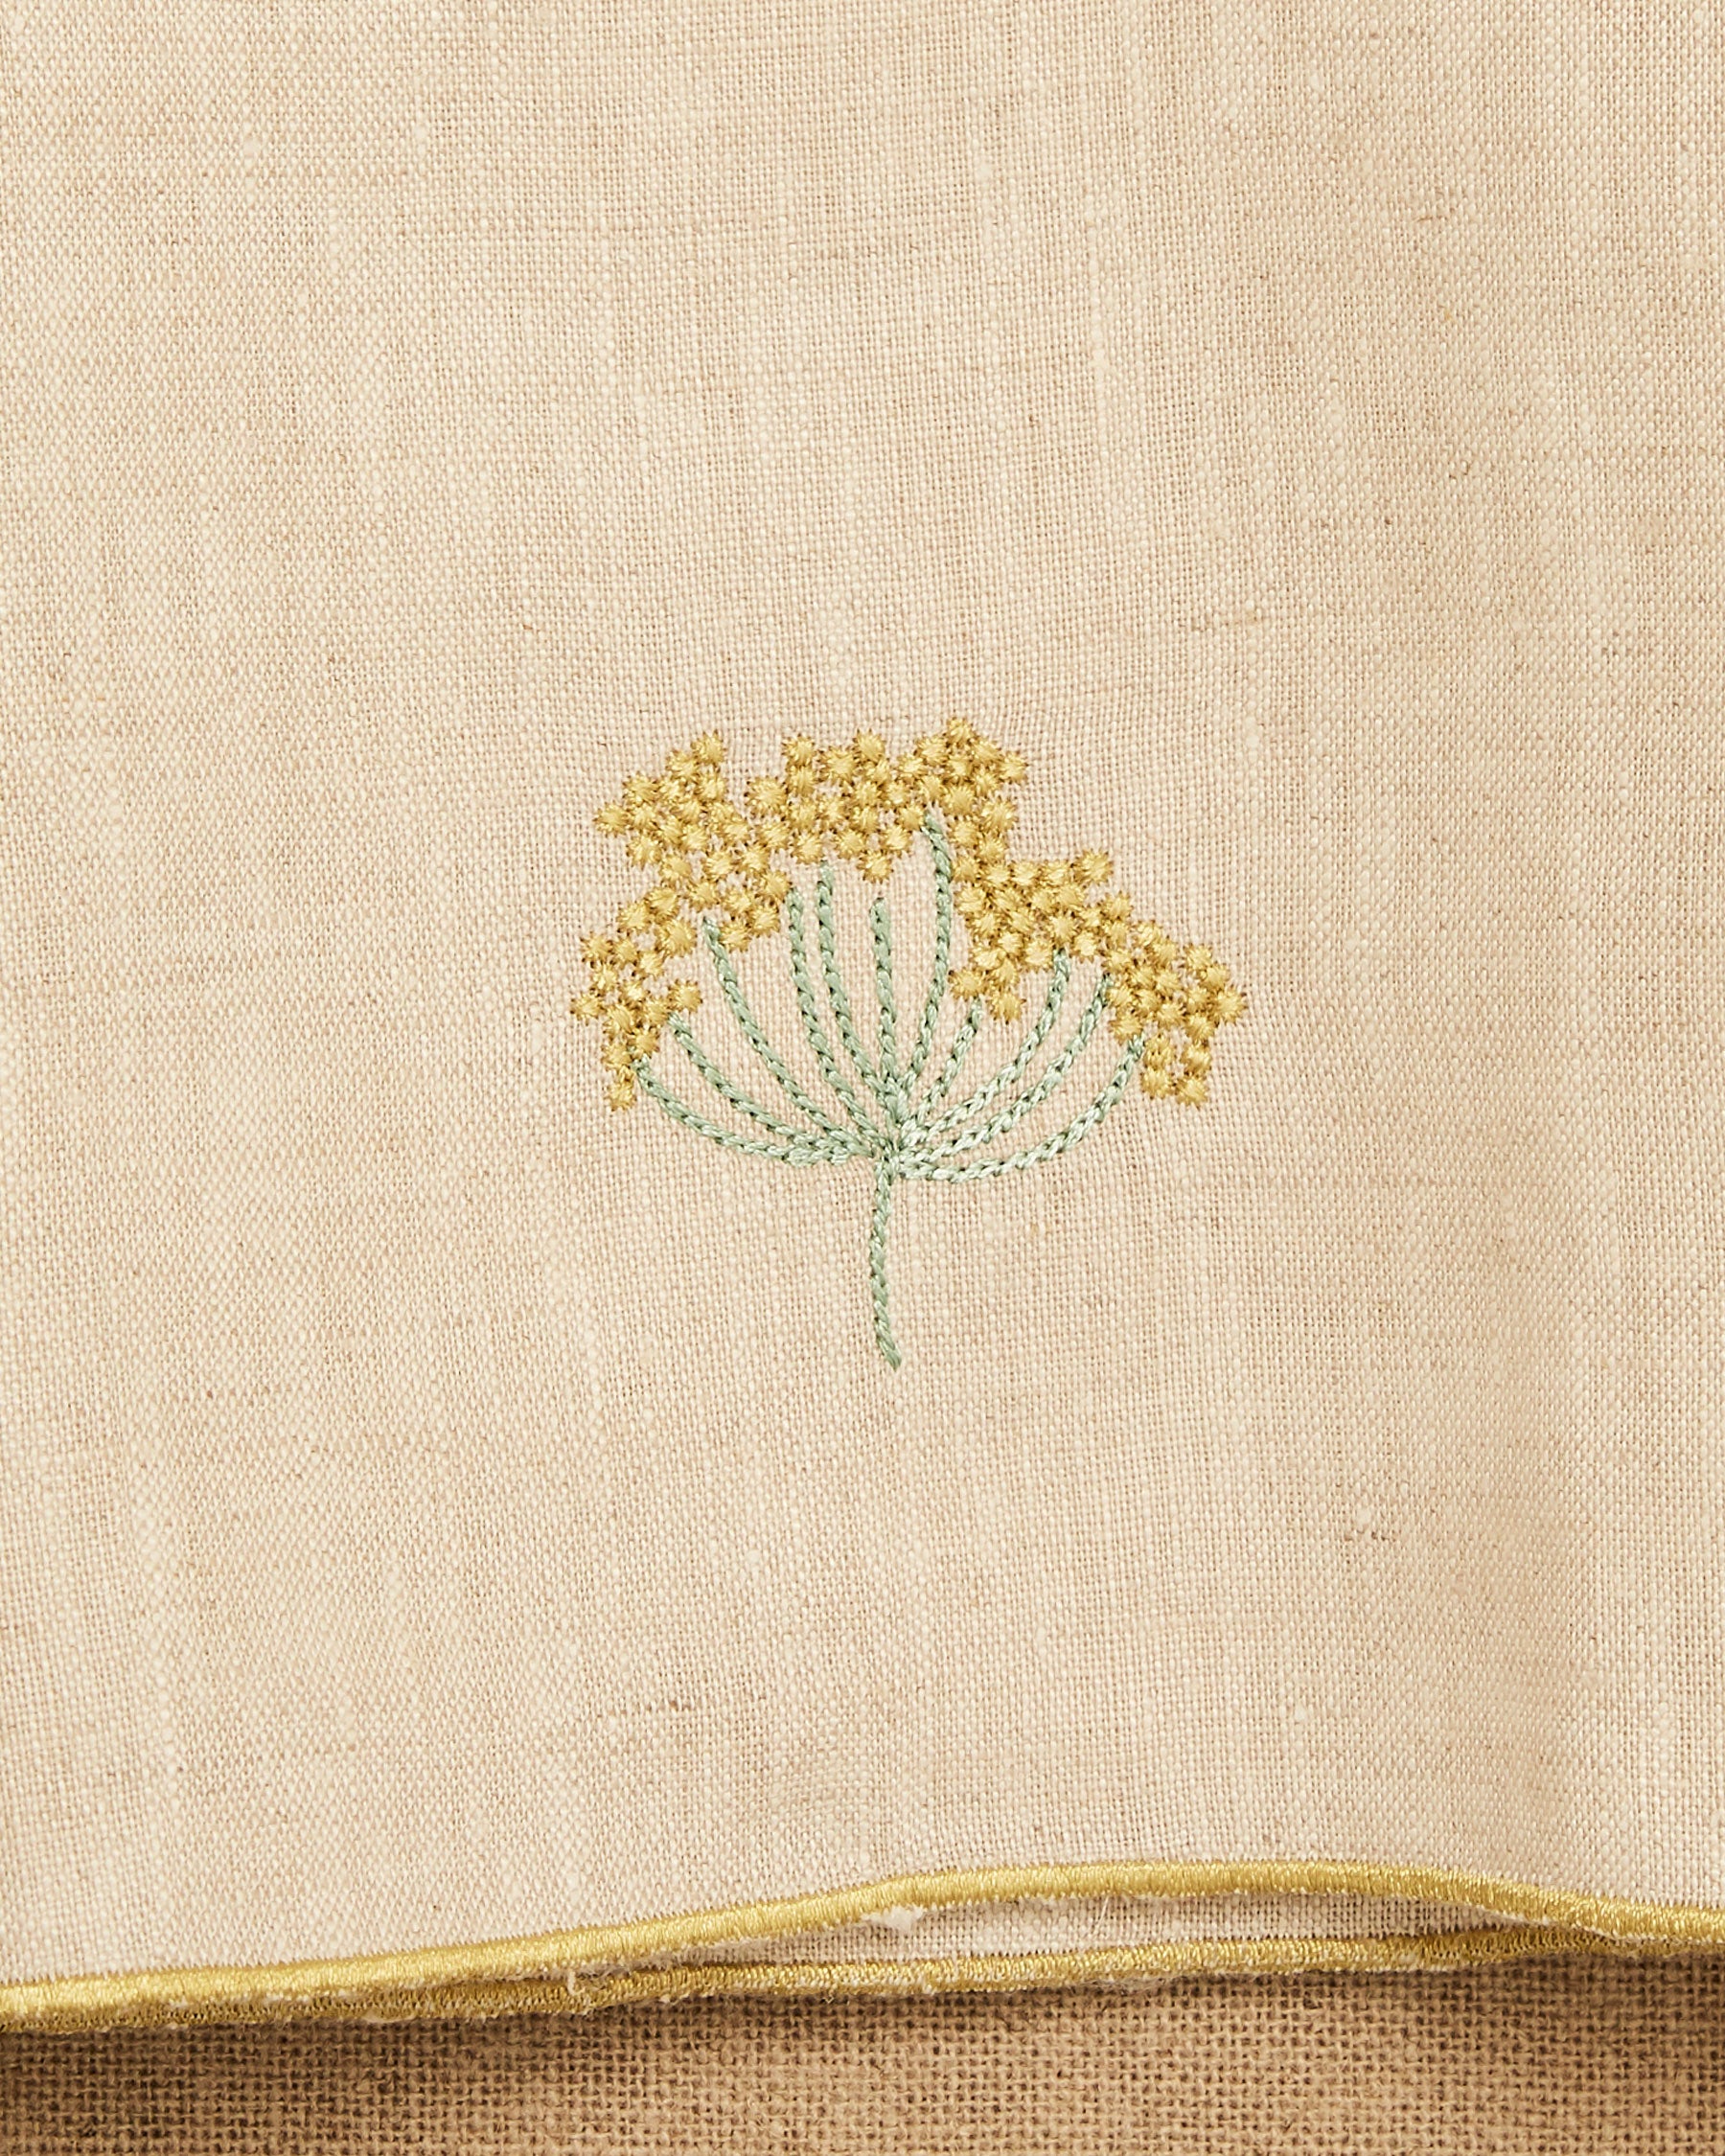 Hand Embroidered Yellow Flower Napkin